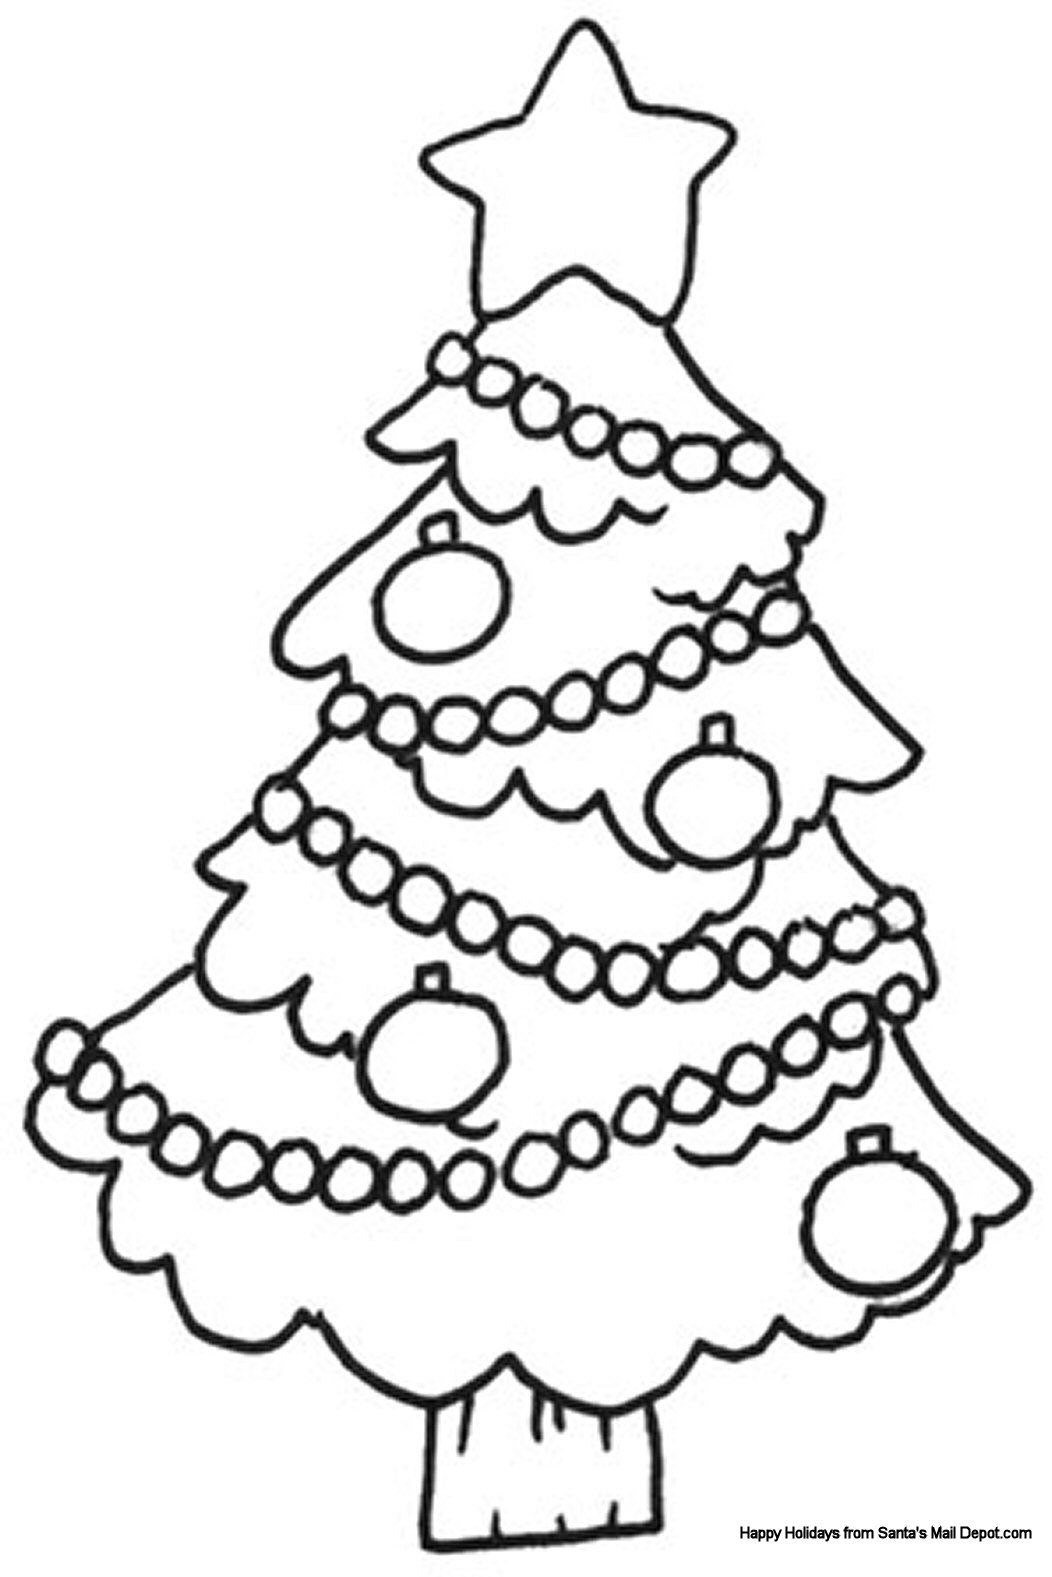 Christmas Coloring Pages For Toddlers - Coloring